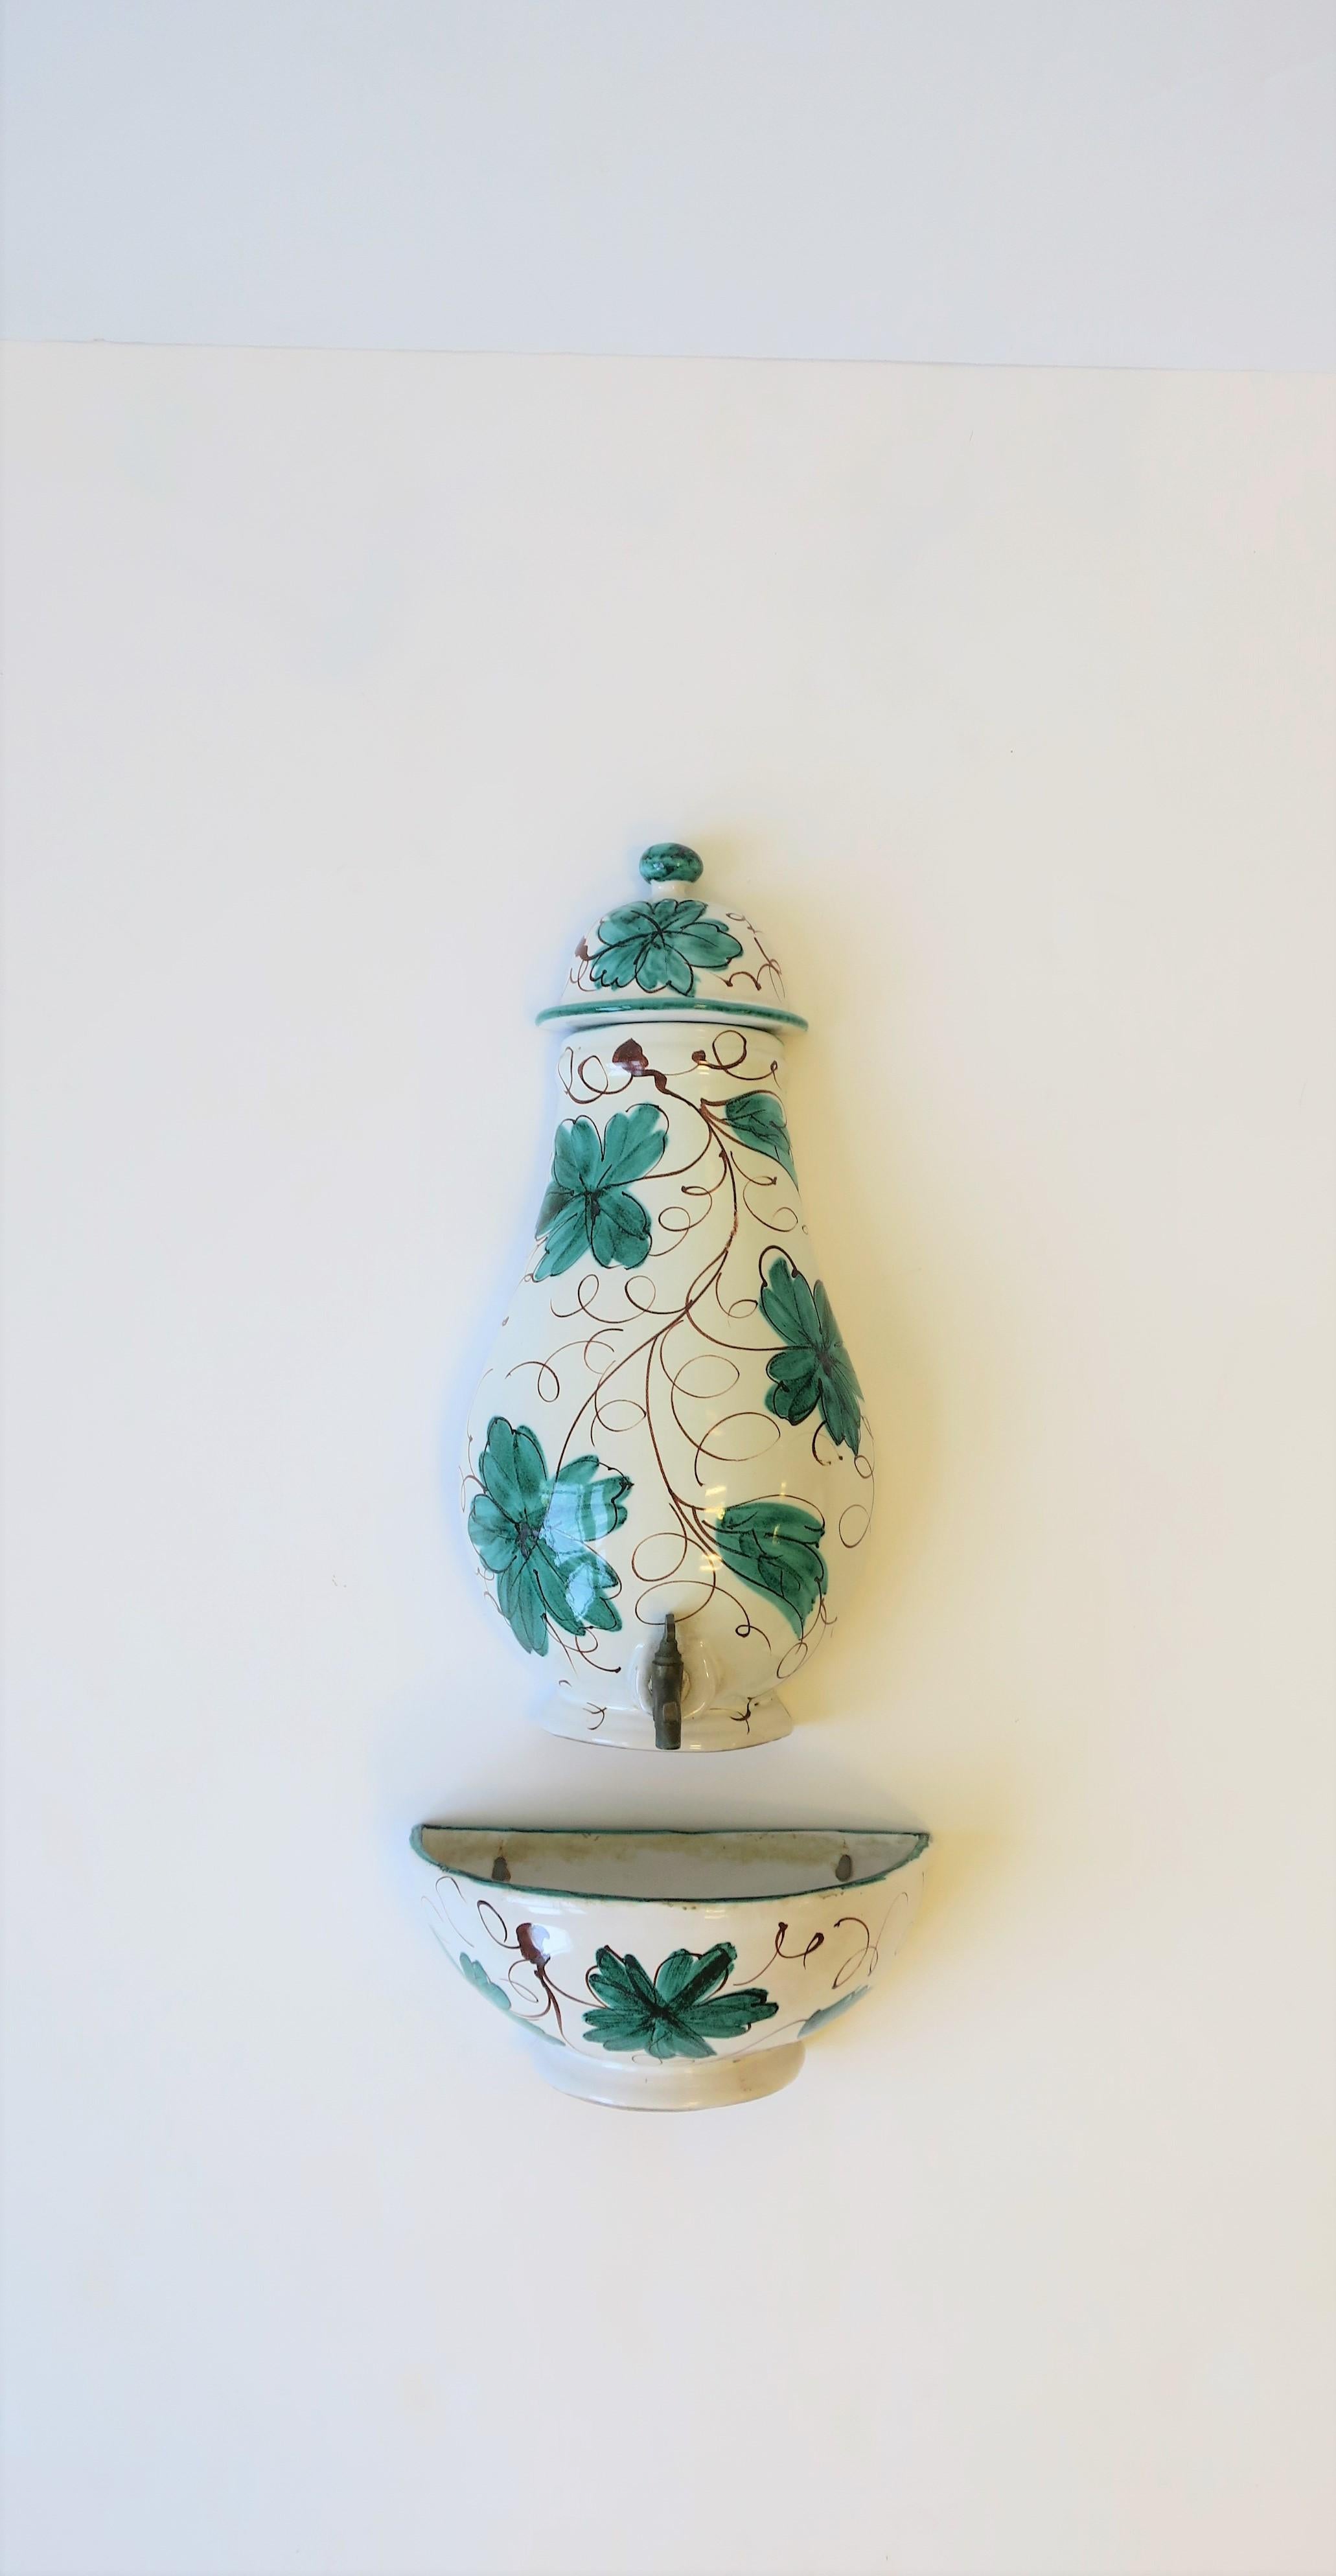 A beautiful hand painted white and green Italian terracotta ceramic and brass wall fountain, circa 20th century, Italy. Piece can hold and dispense water, or another beverage such as tea, lemonade, etc. Fountain consists of three pieces and is wall